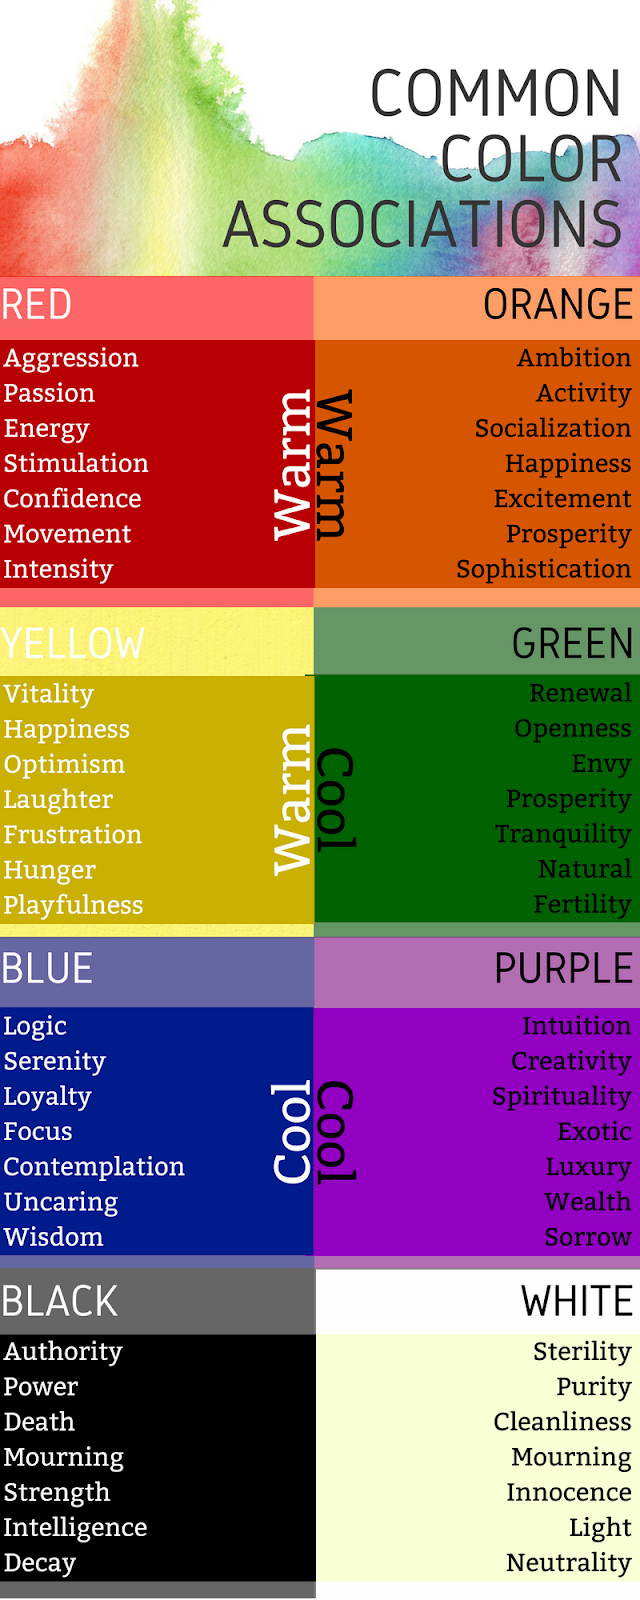 Chromotherapy Color Chart